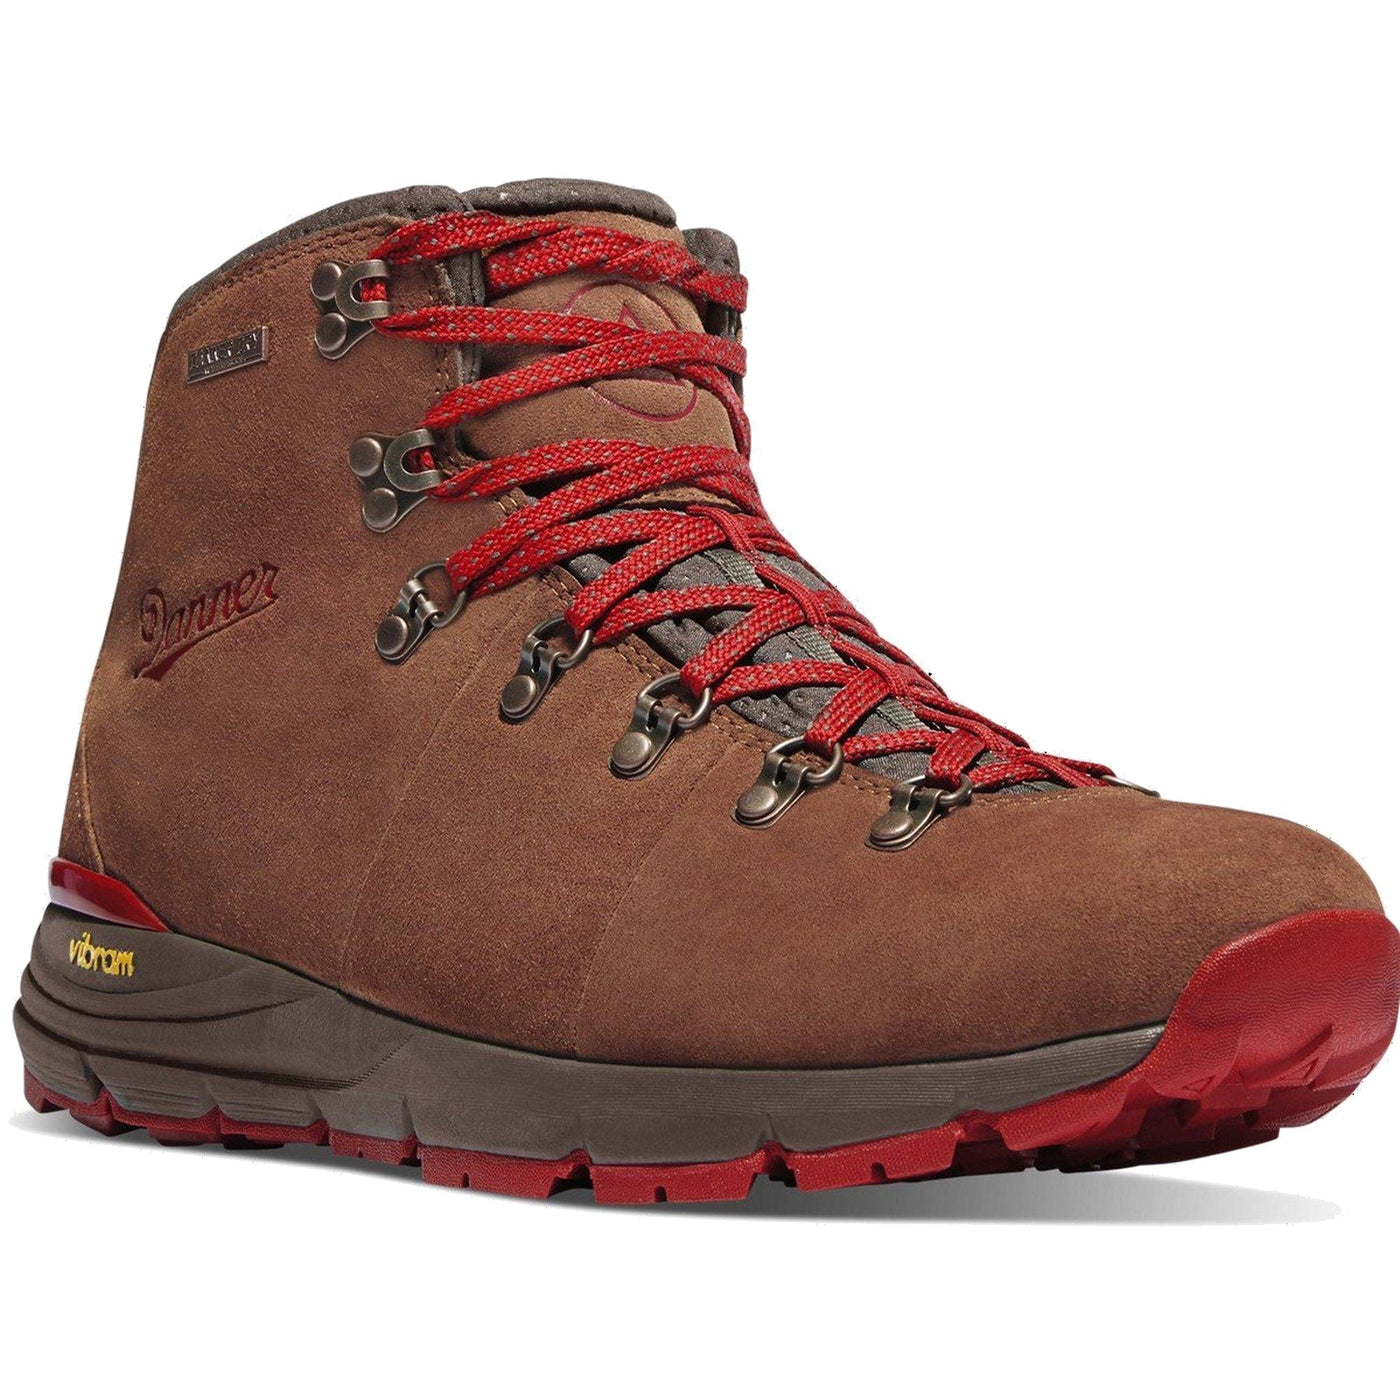 Danner Men's Mountain 600 4.5" Red/Brown side view